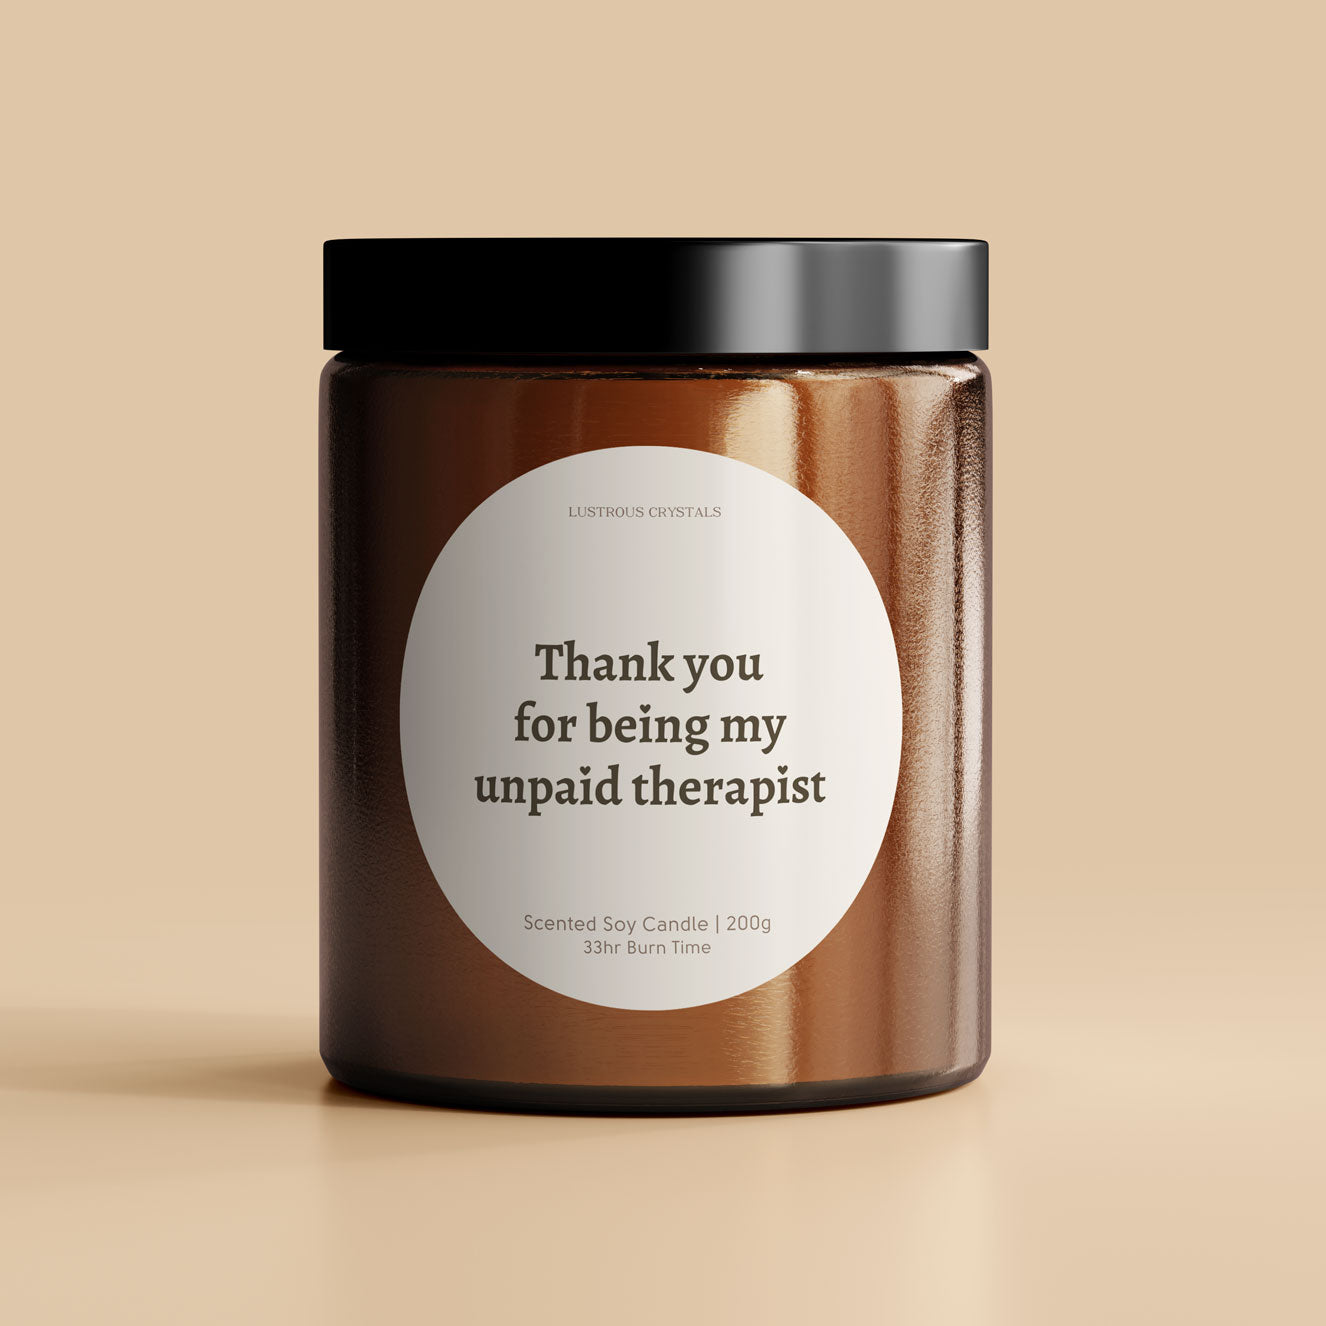 Thank you for being my unpaid therapist | Gifting Candle